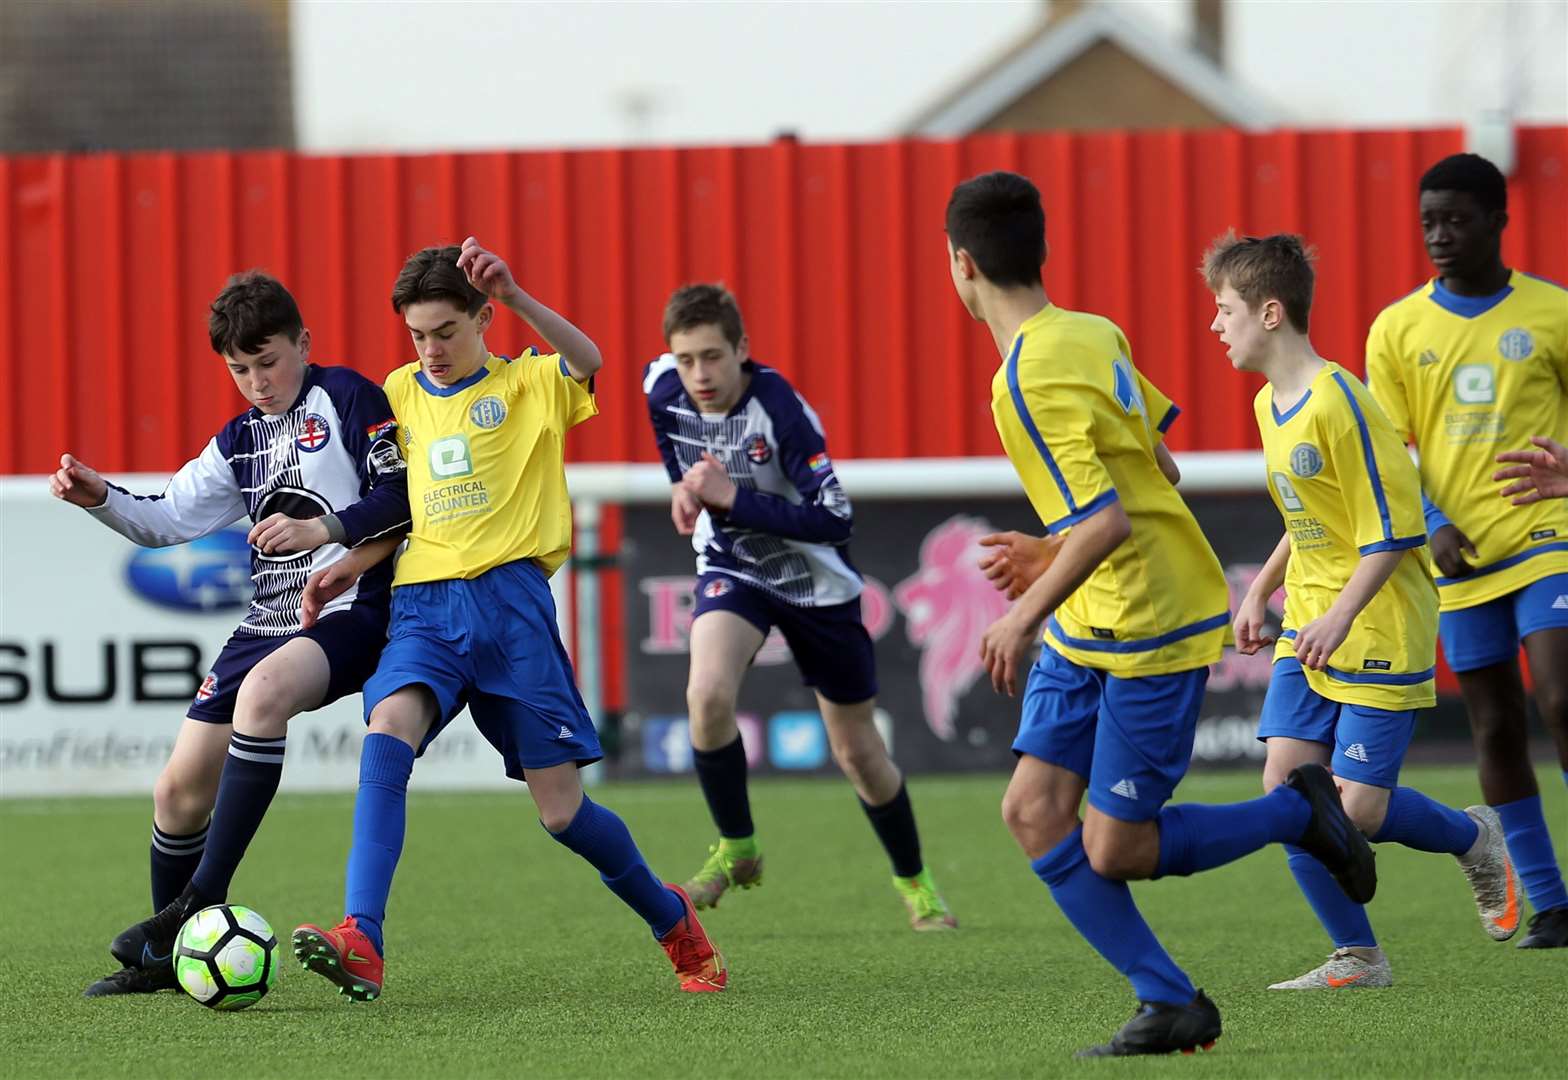 The chase is on as Danson Sports under-13s and Total Football Development under-13s (yellow) battle for possession. Picture: PSP Images (55560608)